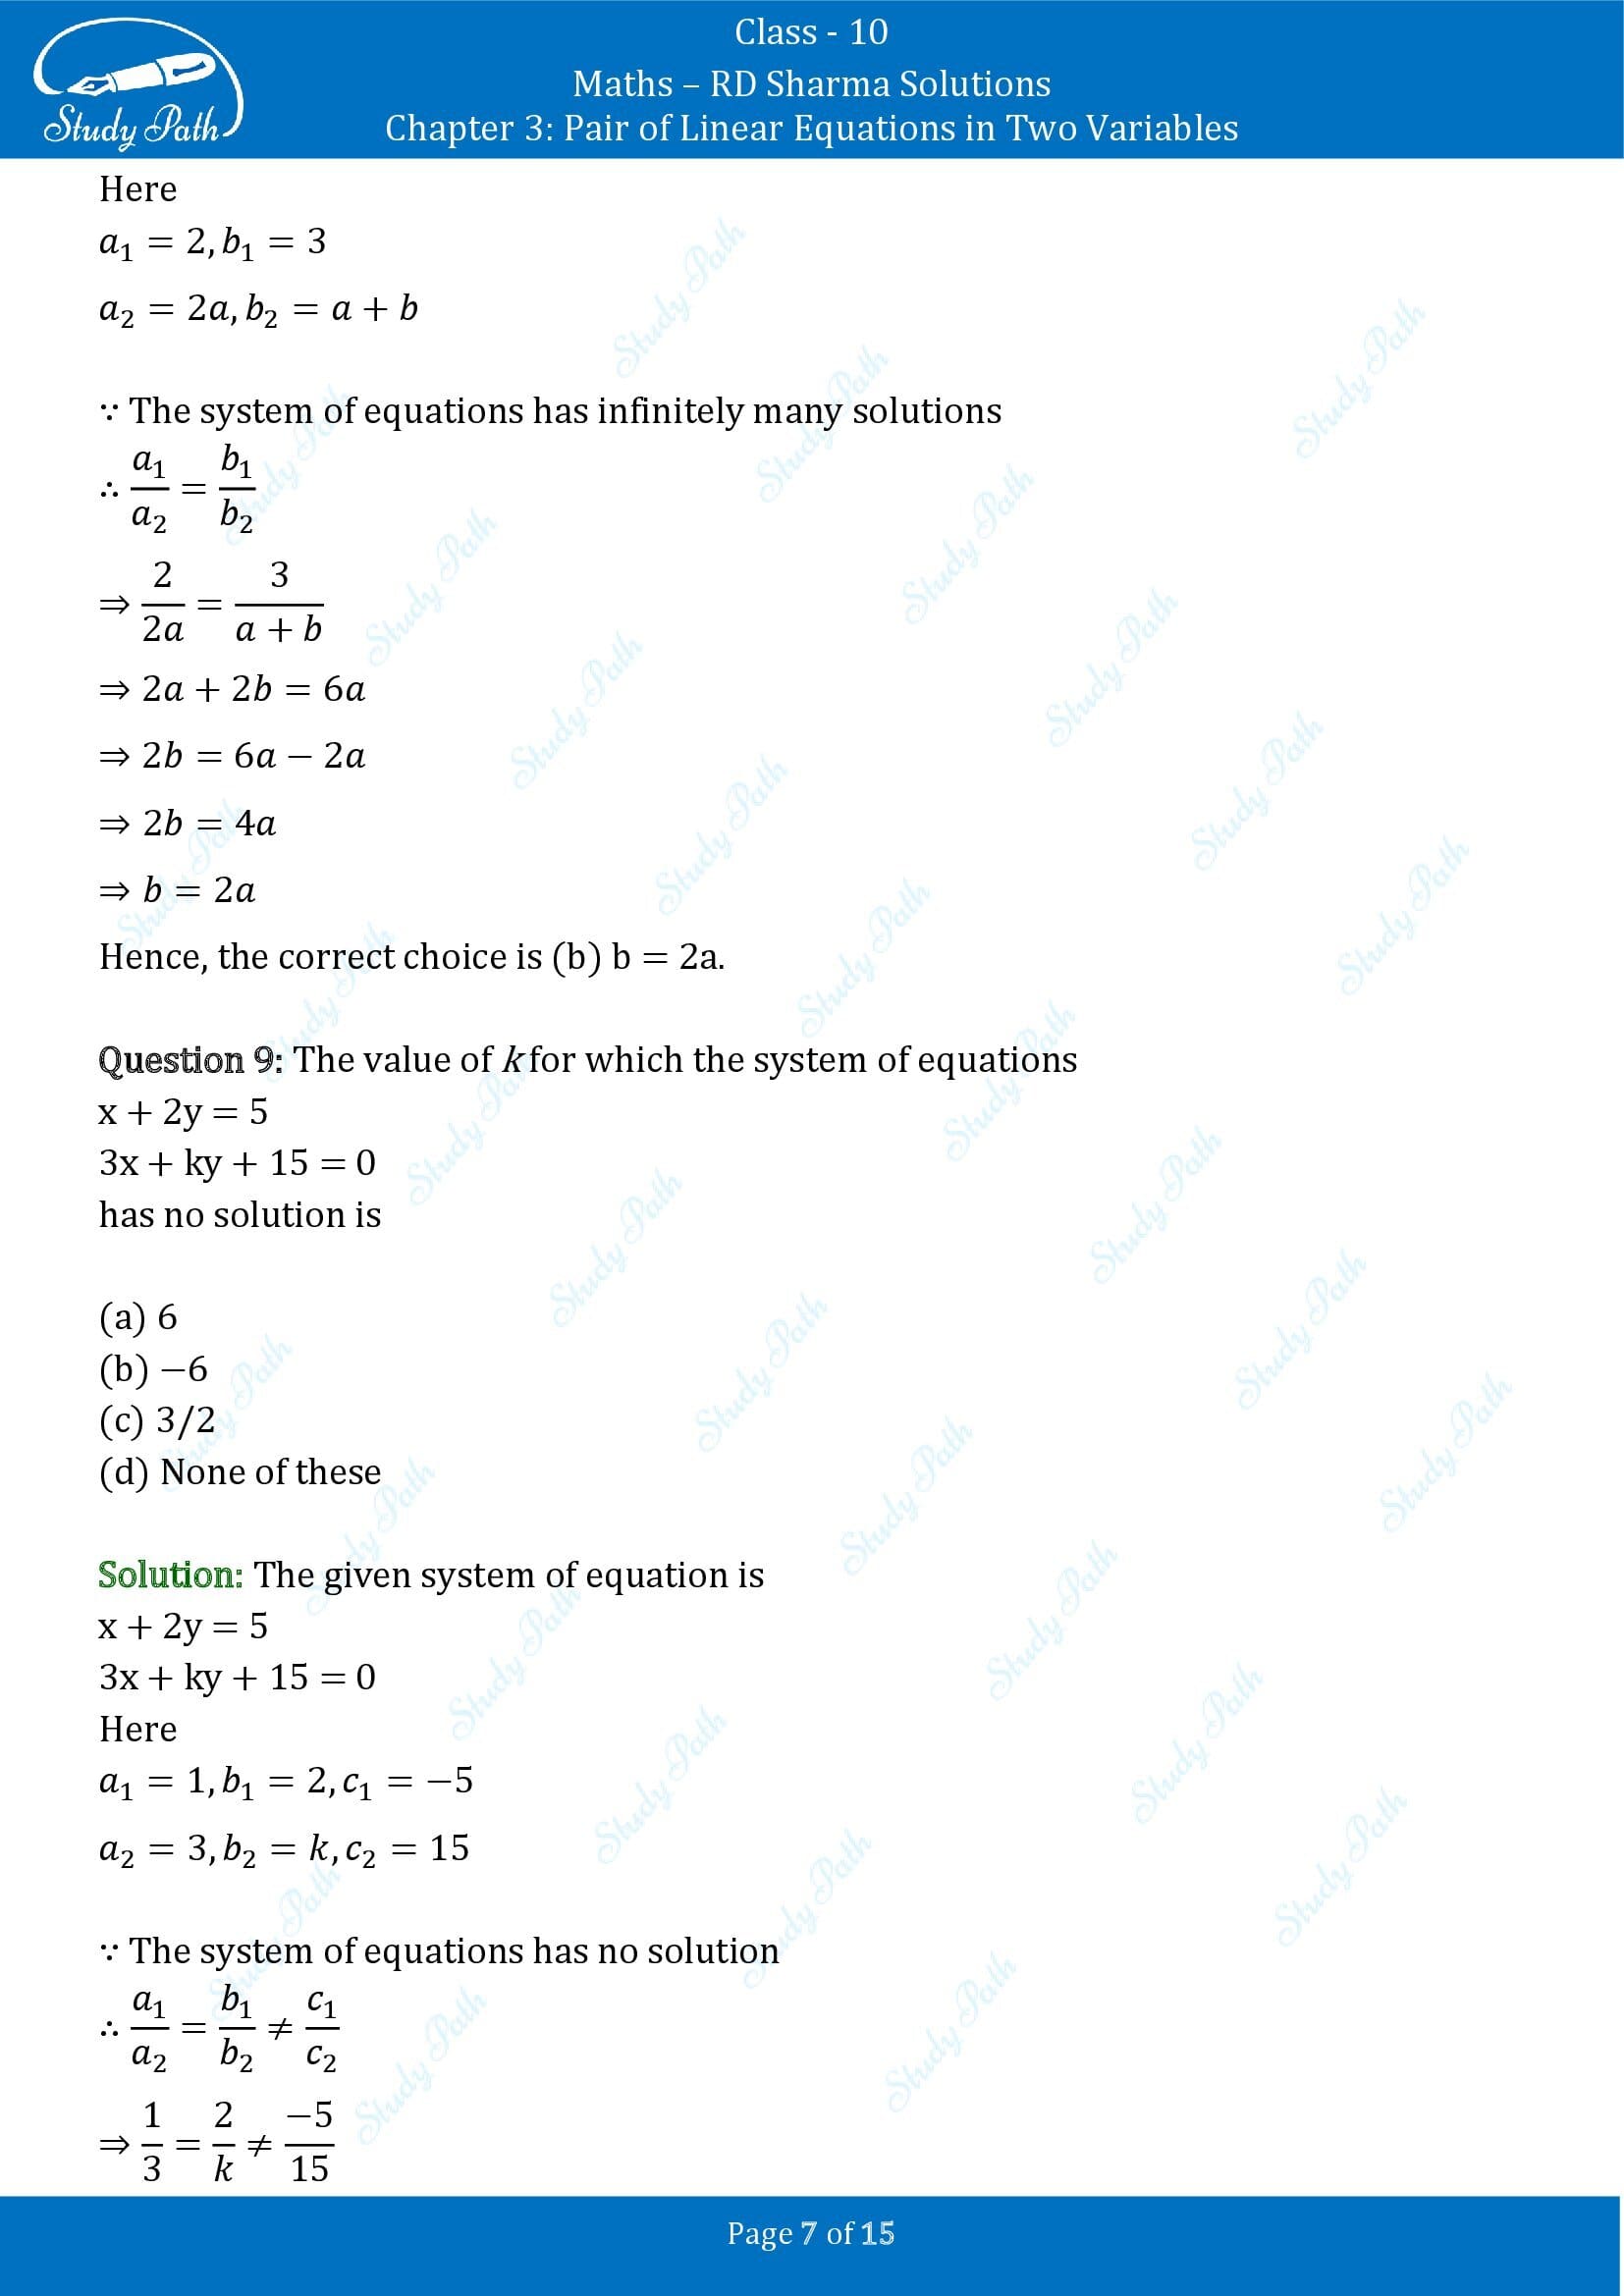 RD Sharma Solutions Class 10 Chapter 3 Pair of Linear Equations in Two Variables Multiple Choice Questions MCQs 00007